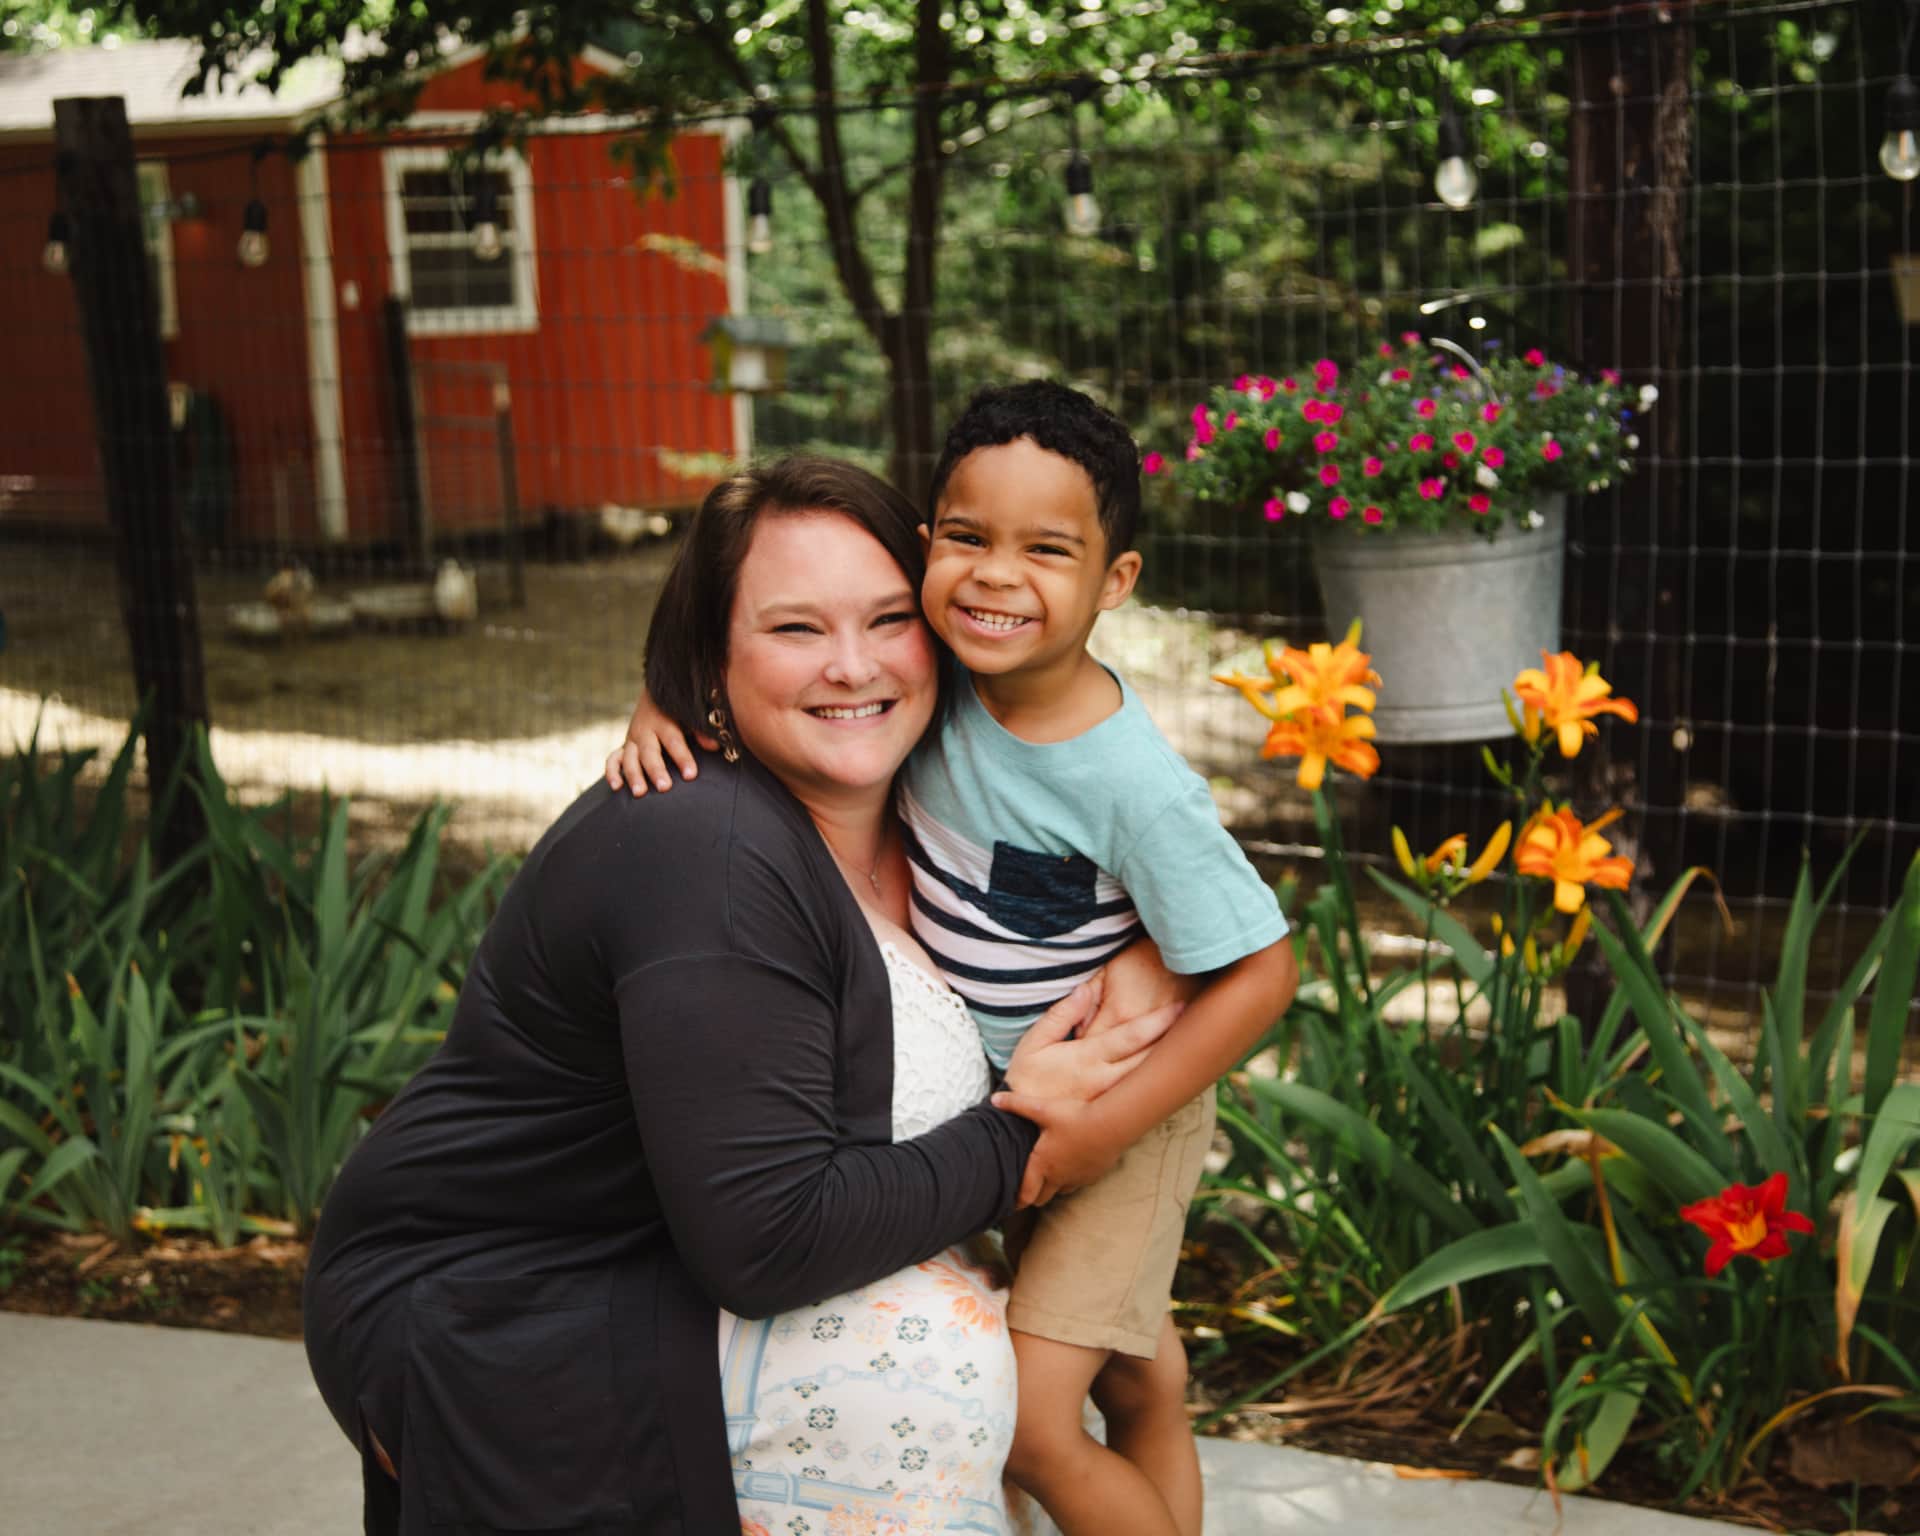 Because of Bethlehem House, I was able to get my life back on track and heal from the mental struggles that once consumed me. They encouraged me to not only become a great mother, but a great woman as well.